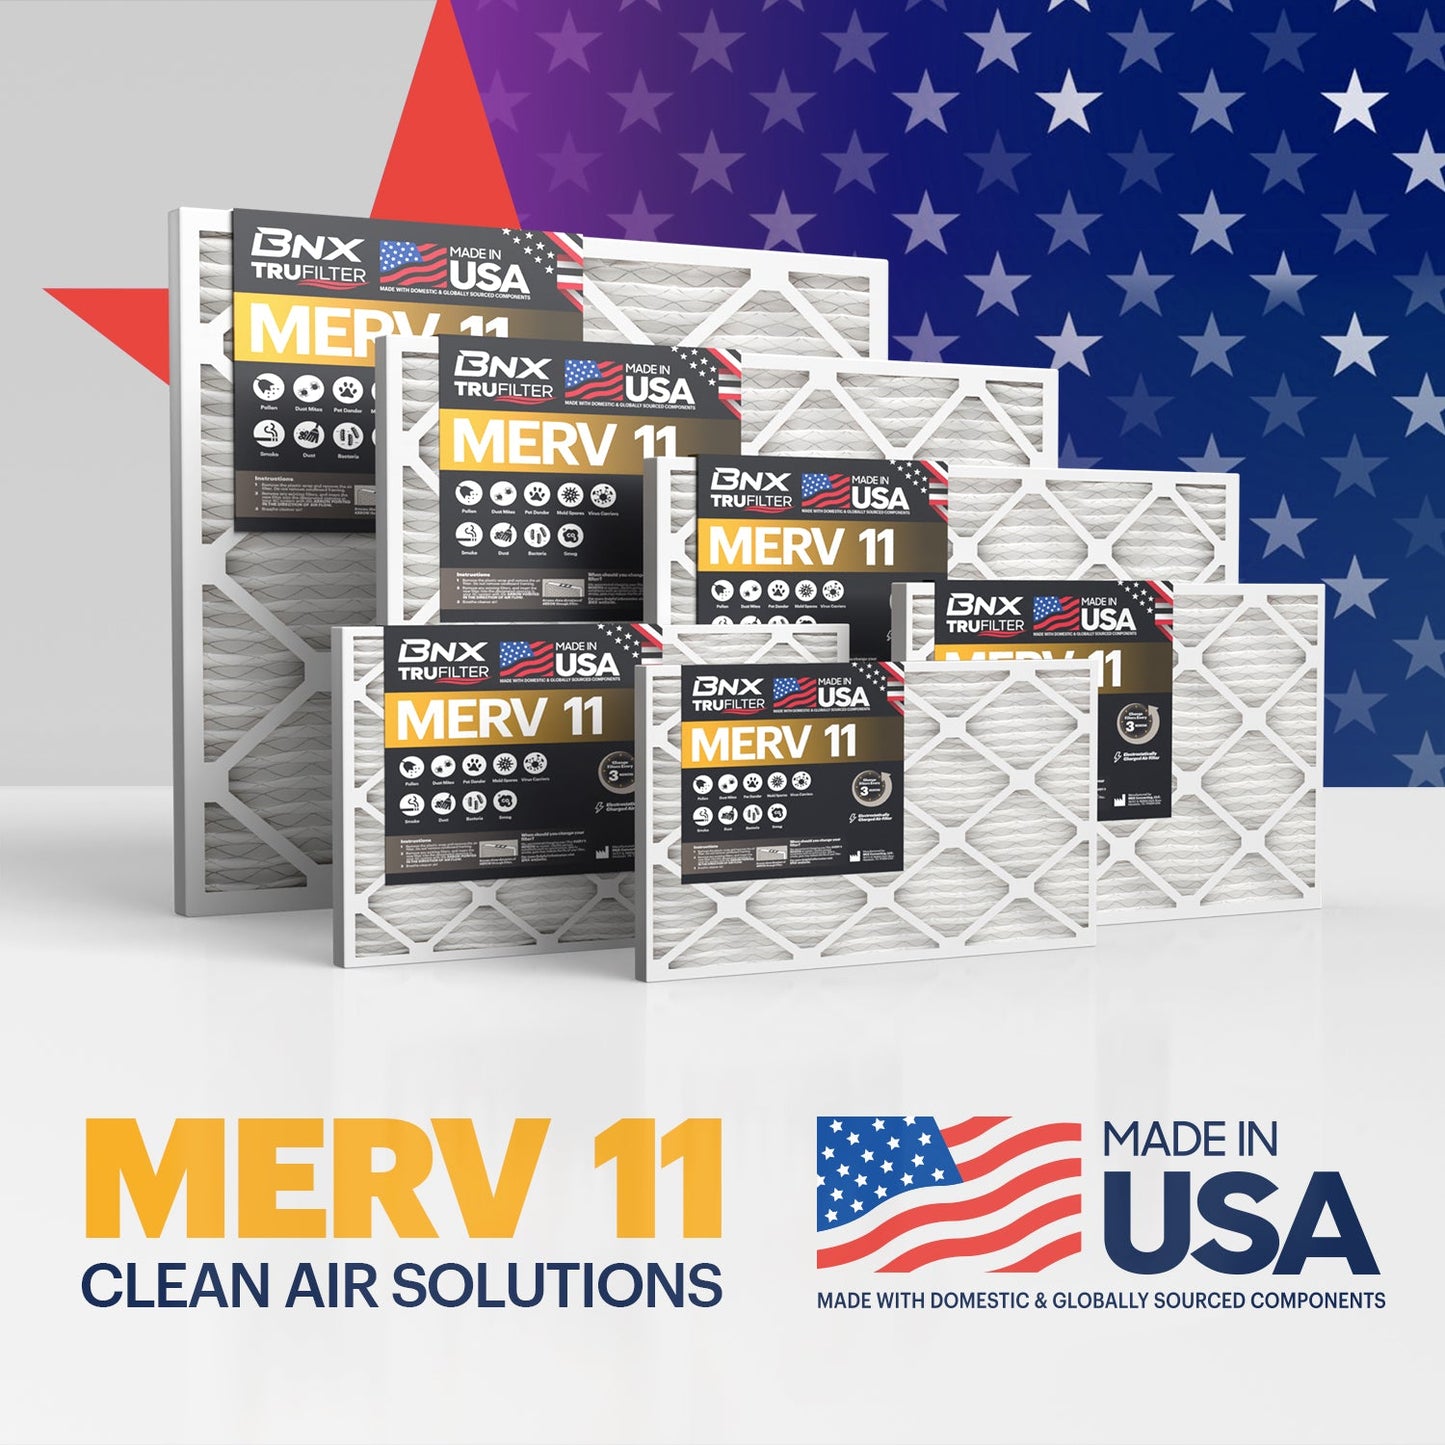 BNX TruFilter 18x20x1 Air Filter MERV 11 (12-Pack)- MADE IN USA - Allergen Defense Electrostatic Pleated Air Conditioner HVAC AC Furnace Filters for Allergies, Dust, Pet, Smoke, Allergy MPR 1200 FPR 7